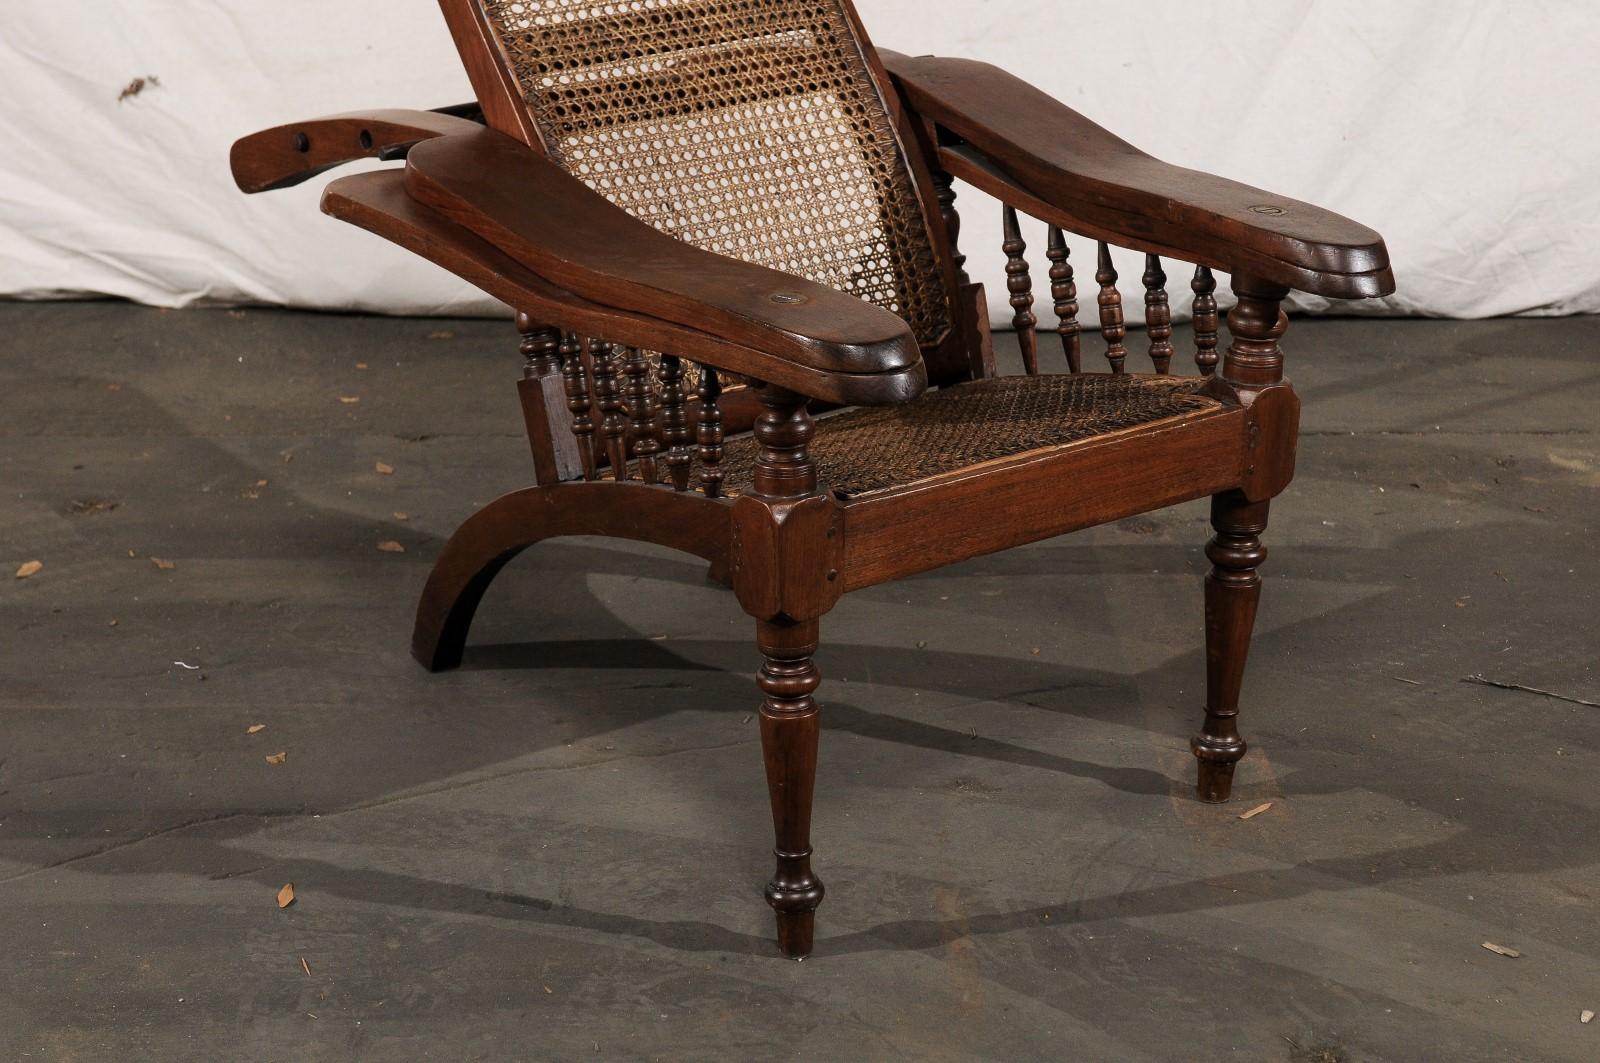 19th Century Anglo-Indian Caned Planters Chair with Leg Stretchers, Metamorphic 1